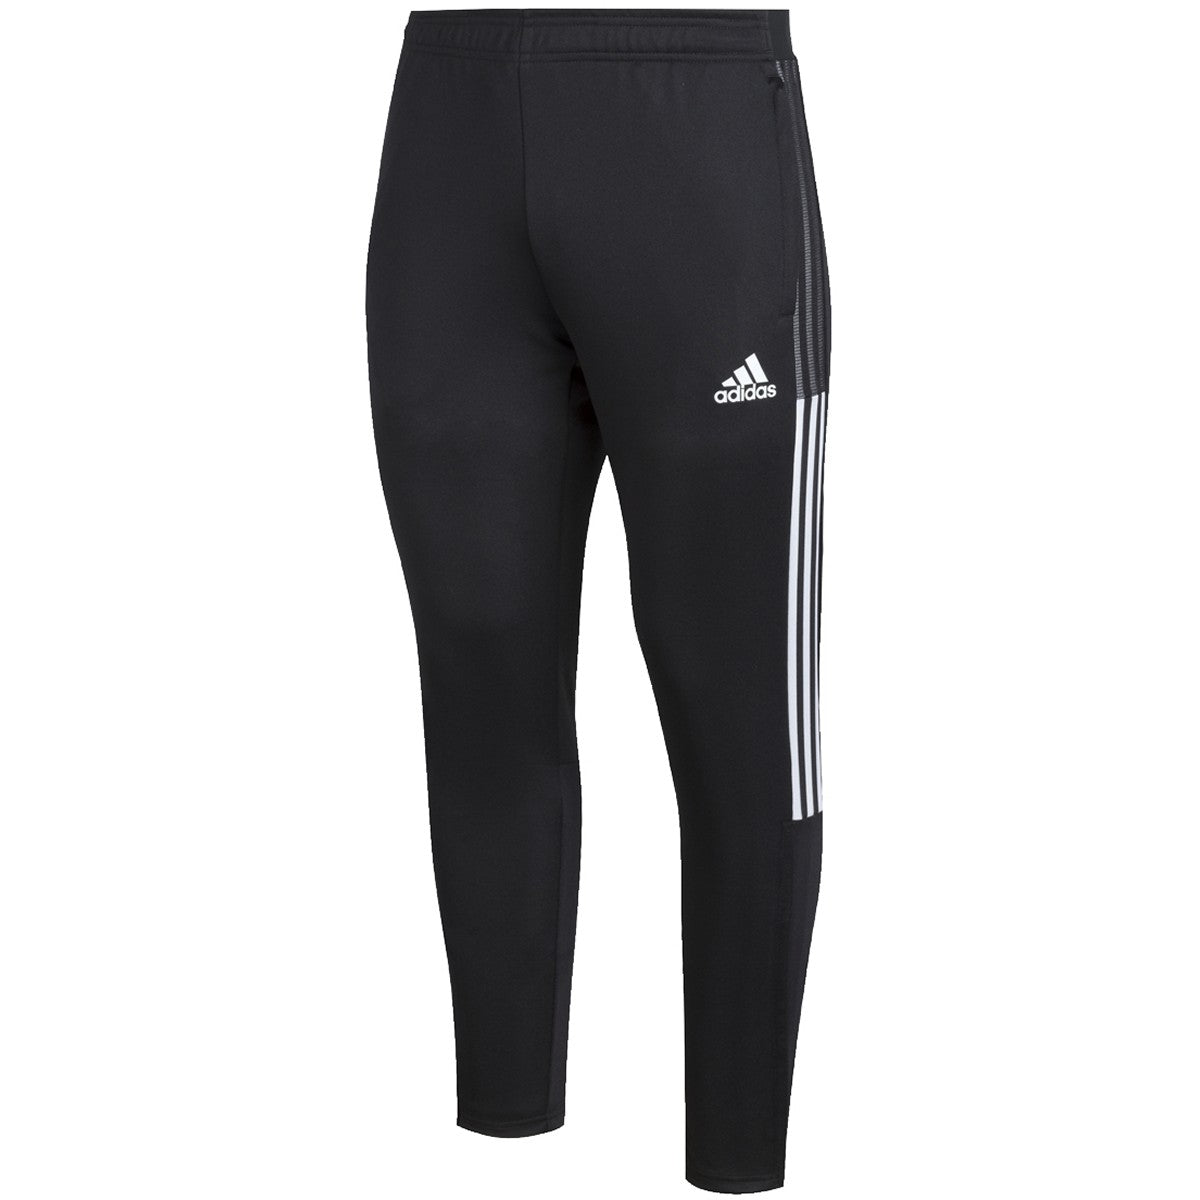 adidas Slim Fit Training Pants League Outfitters